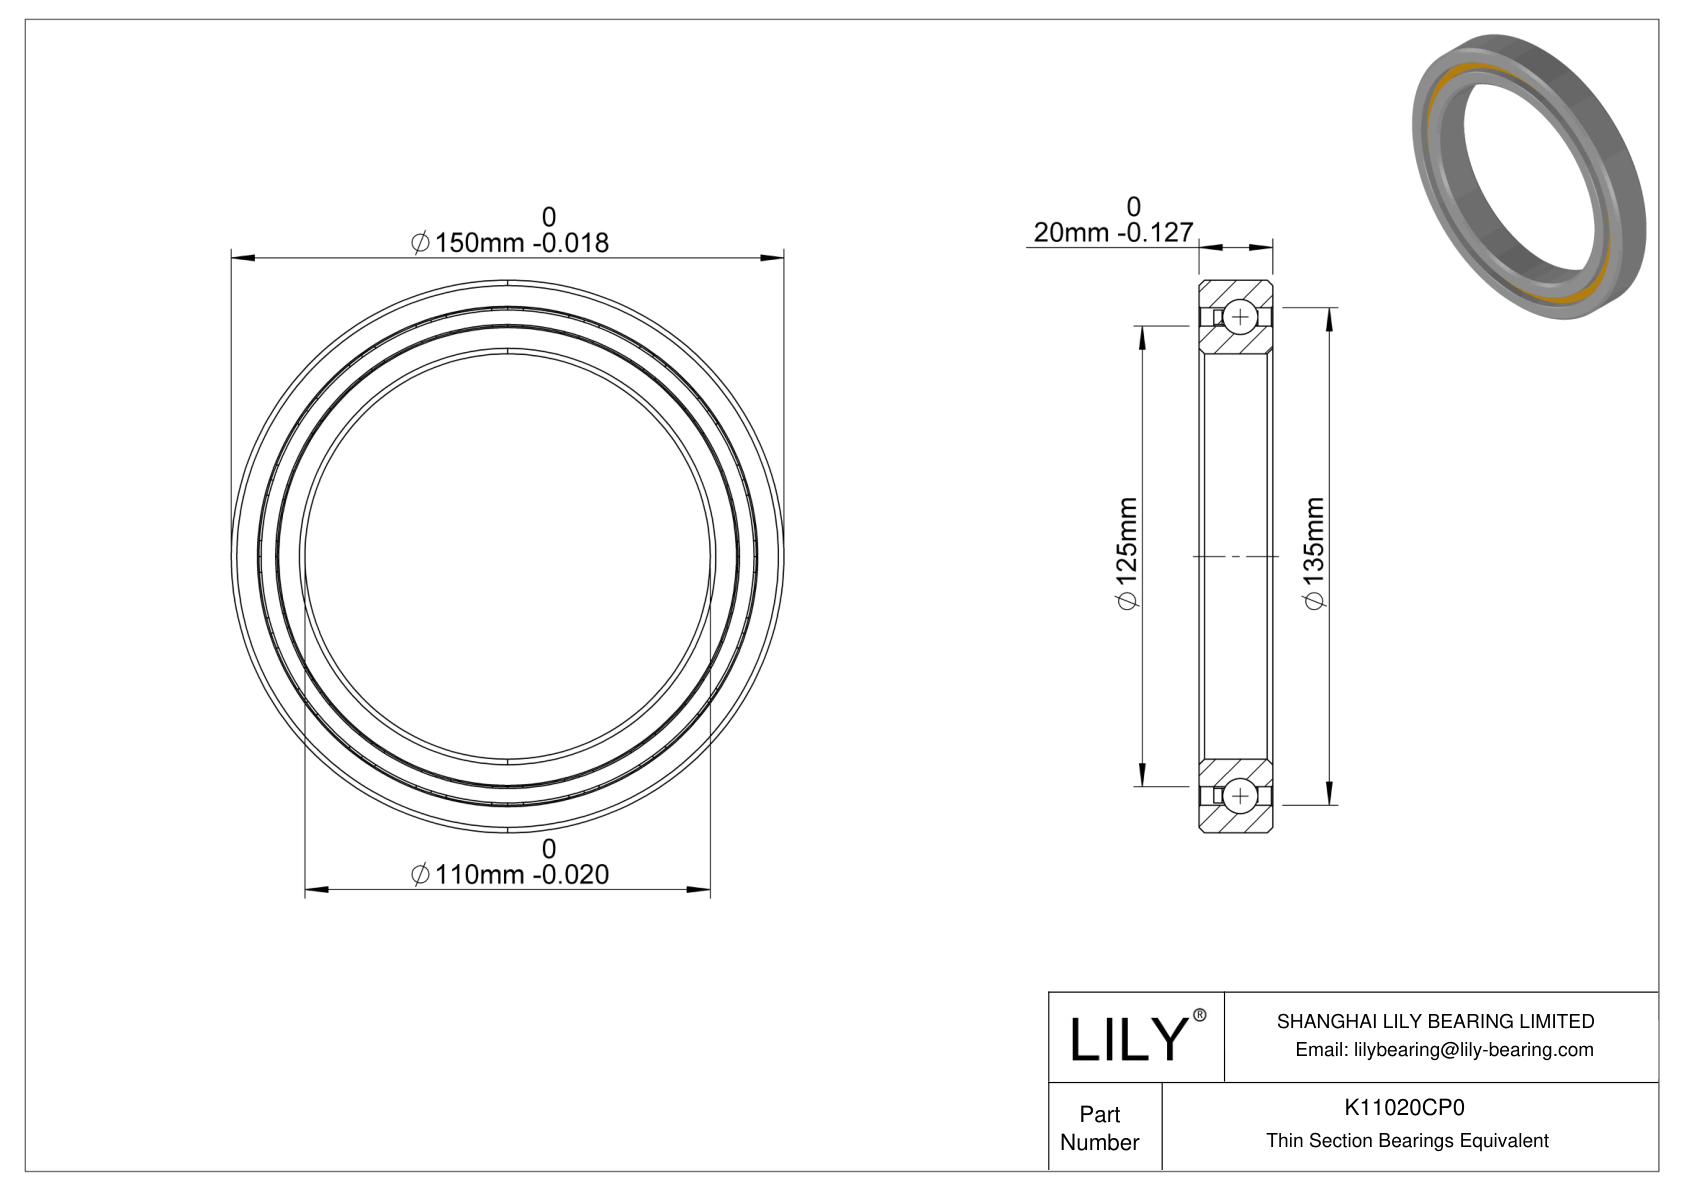 K11020CP0 Constant Section (CS) Bearings cad drawing